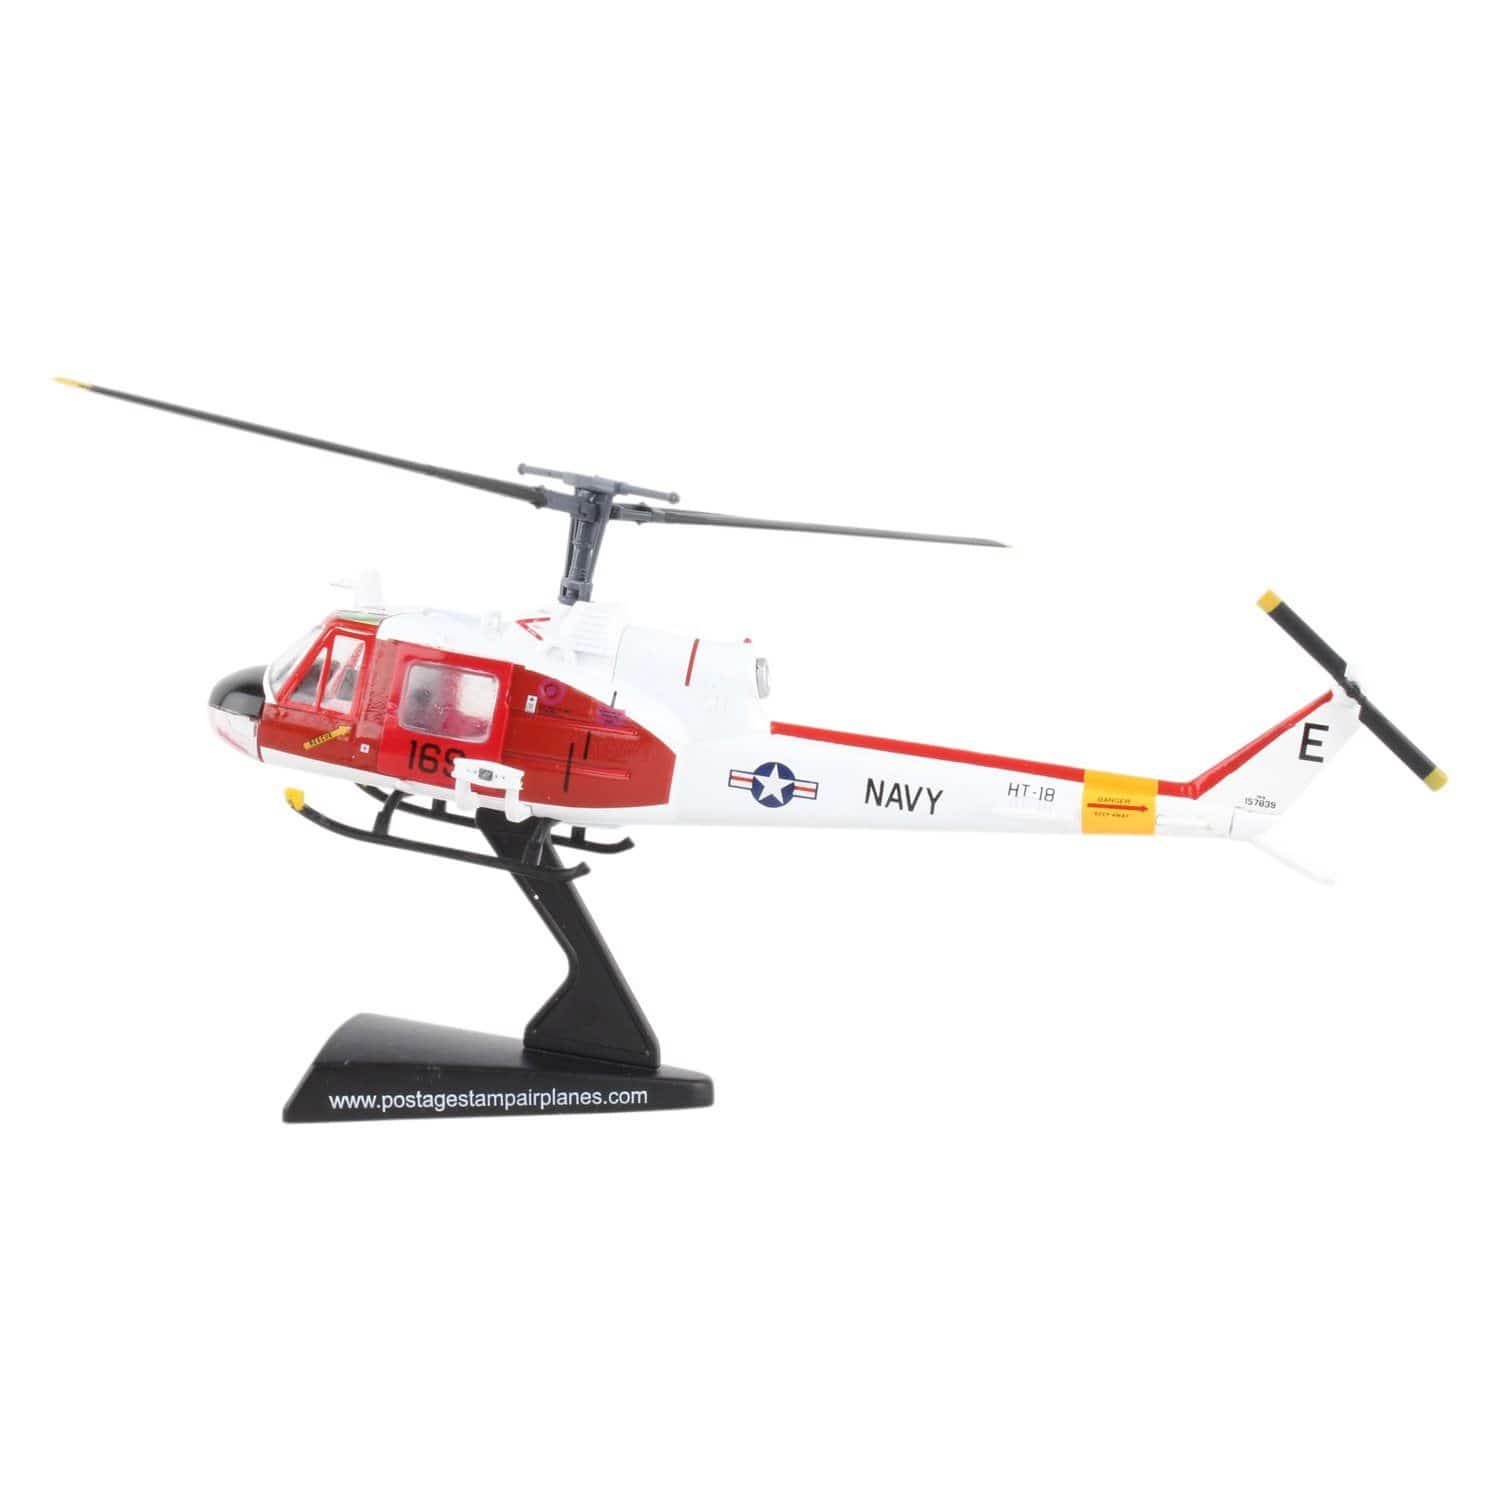 Postage Stamp US Navy TH-1L Iroquois or “Huey” (1:87) - PilotMall.com